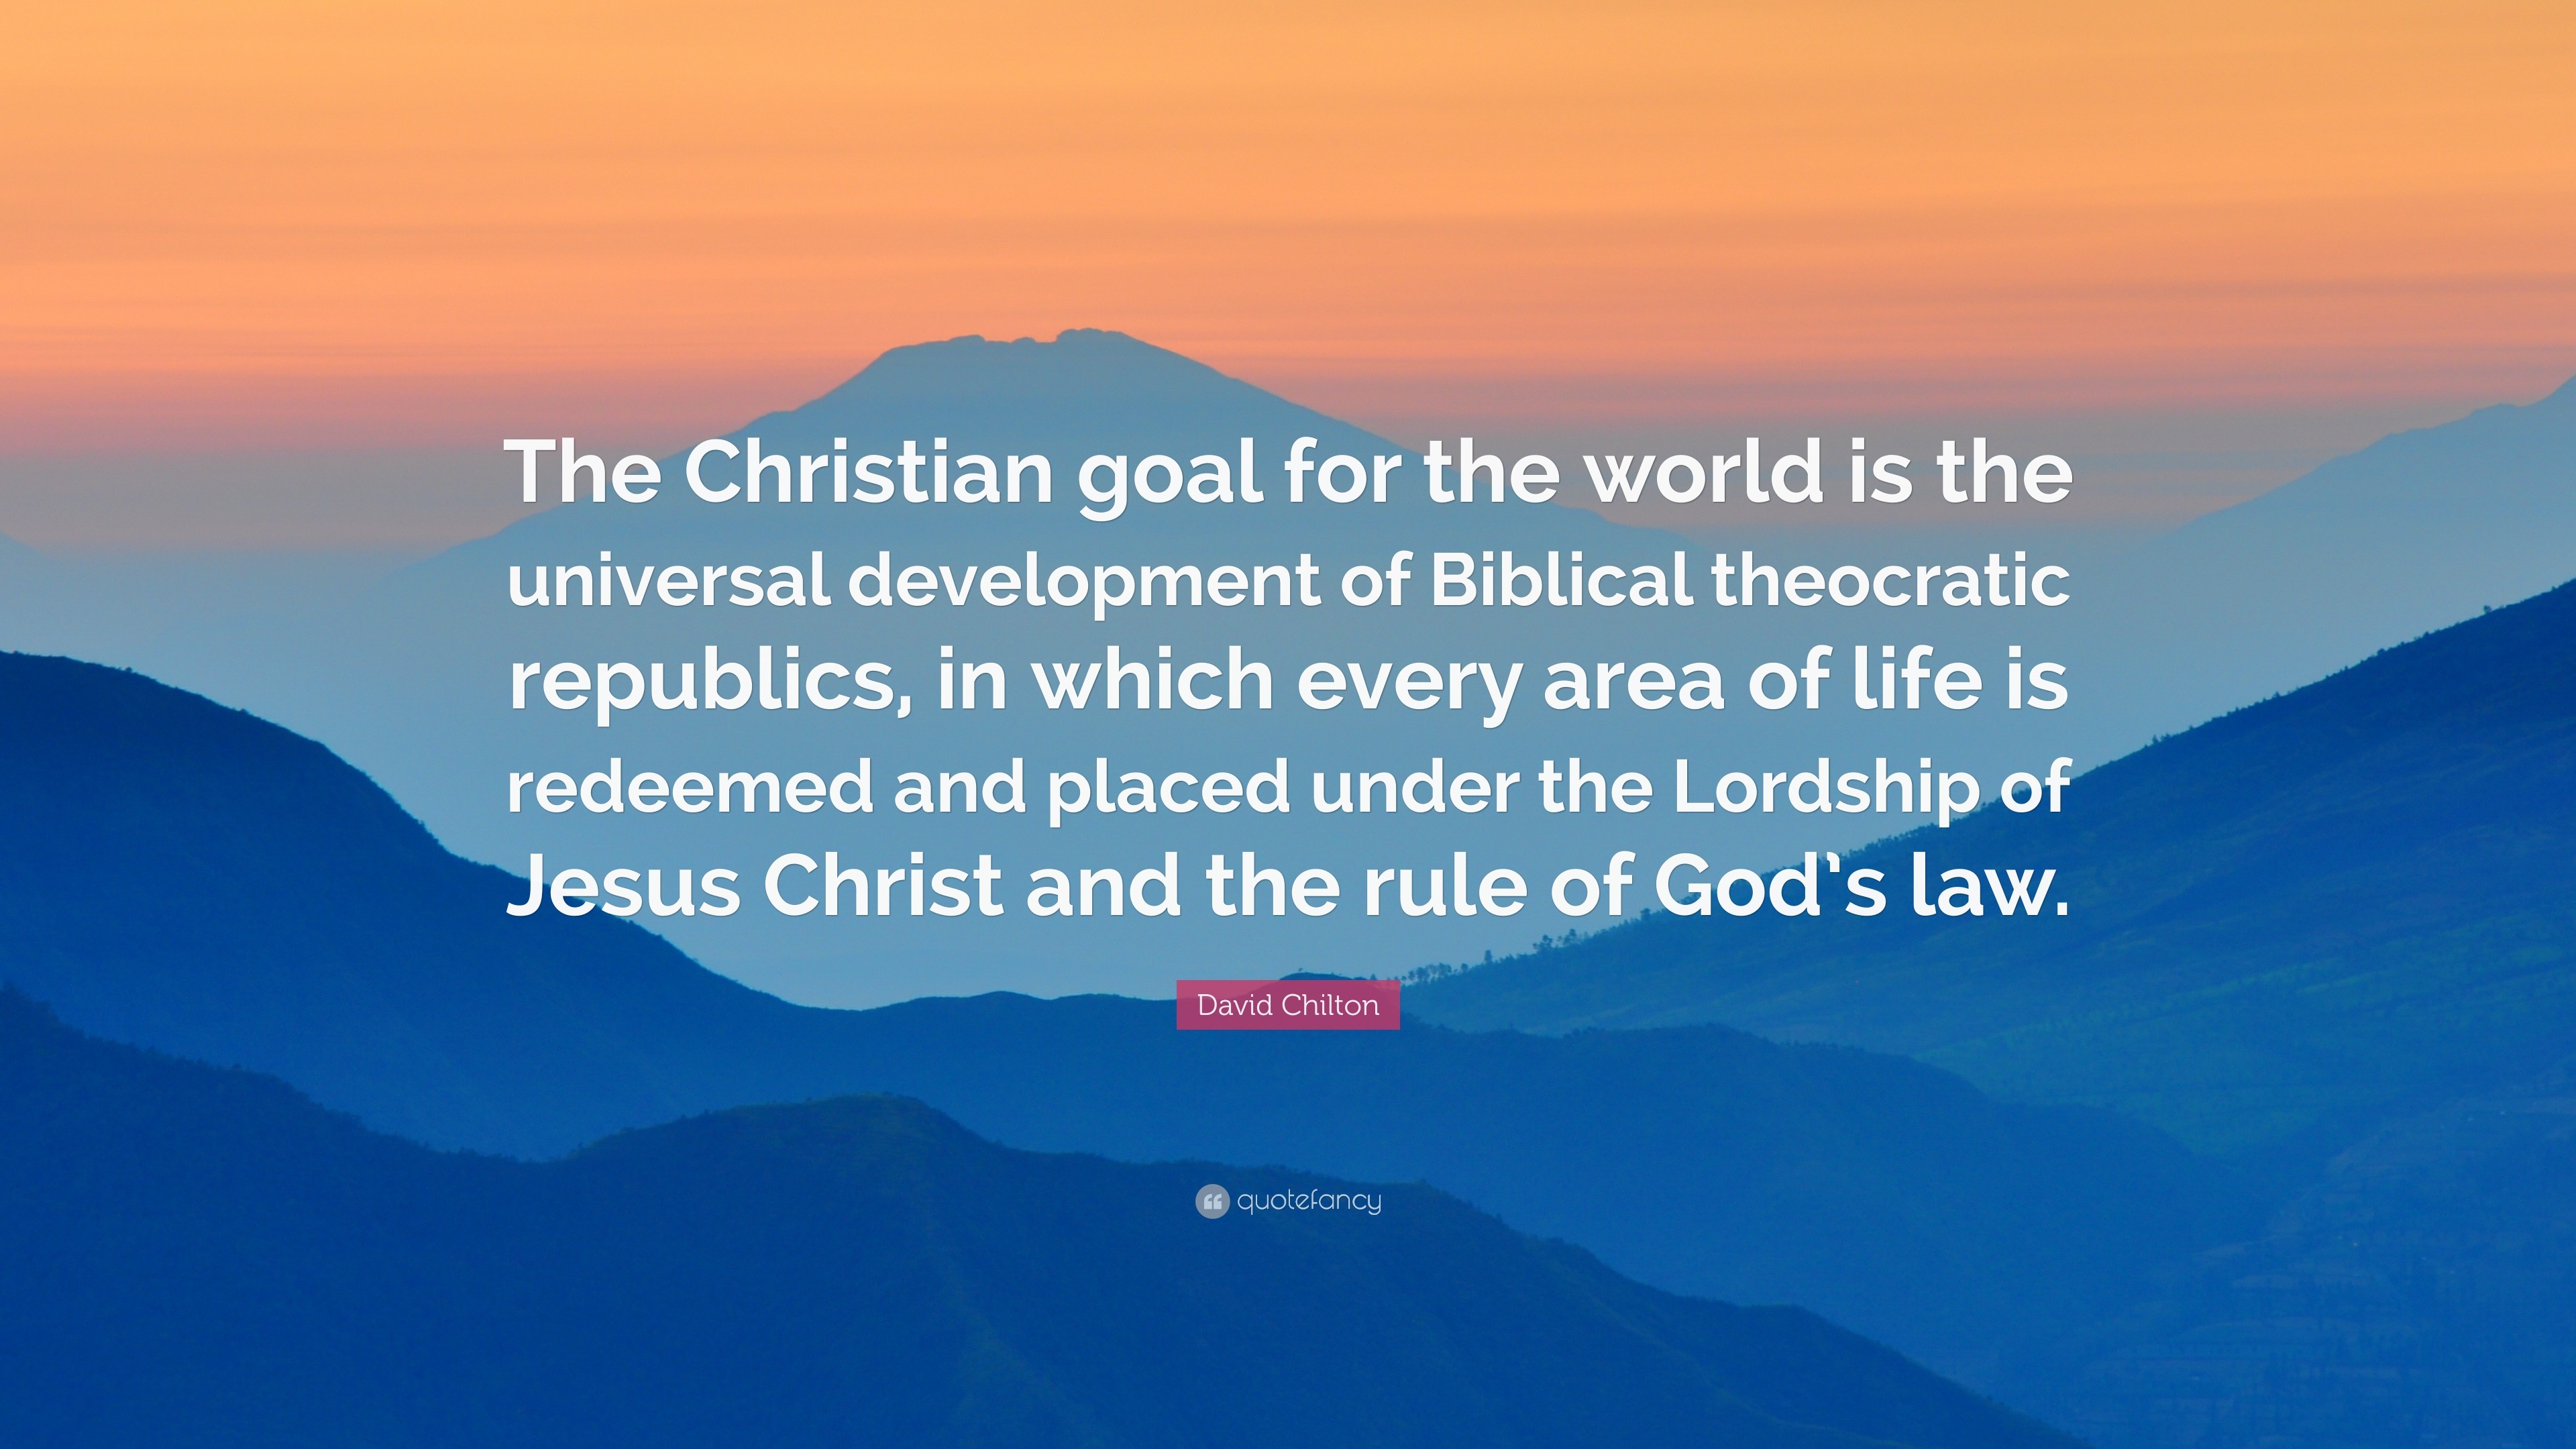 3840x2160 David Chilton Quote: “The Christian goal for the world is the universal  development of